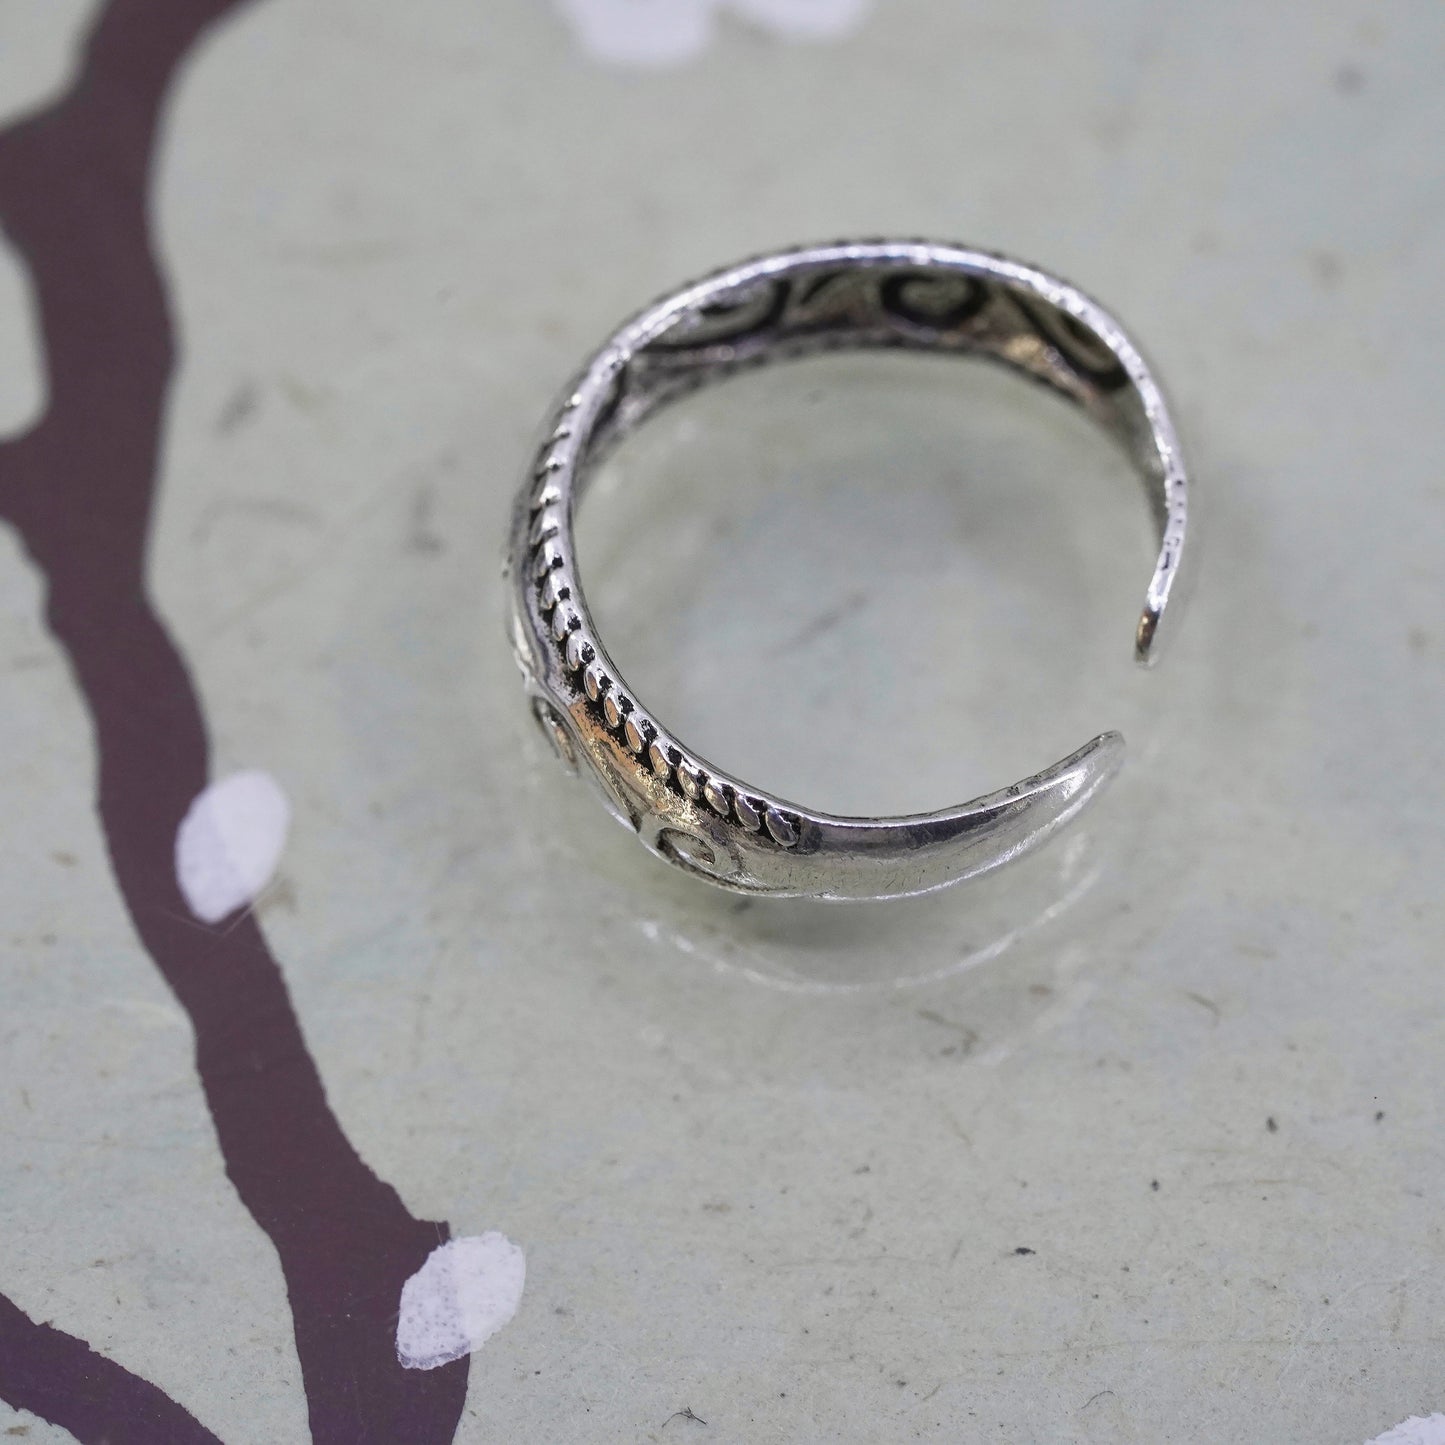 Size 3.25, vintage Sterling silver handmade ring, 925 wavy band